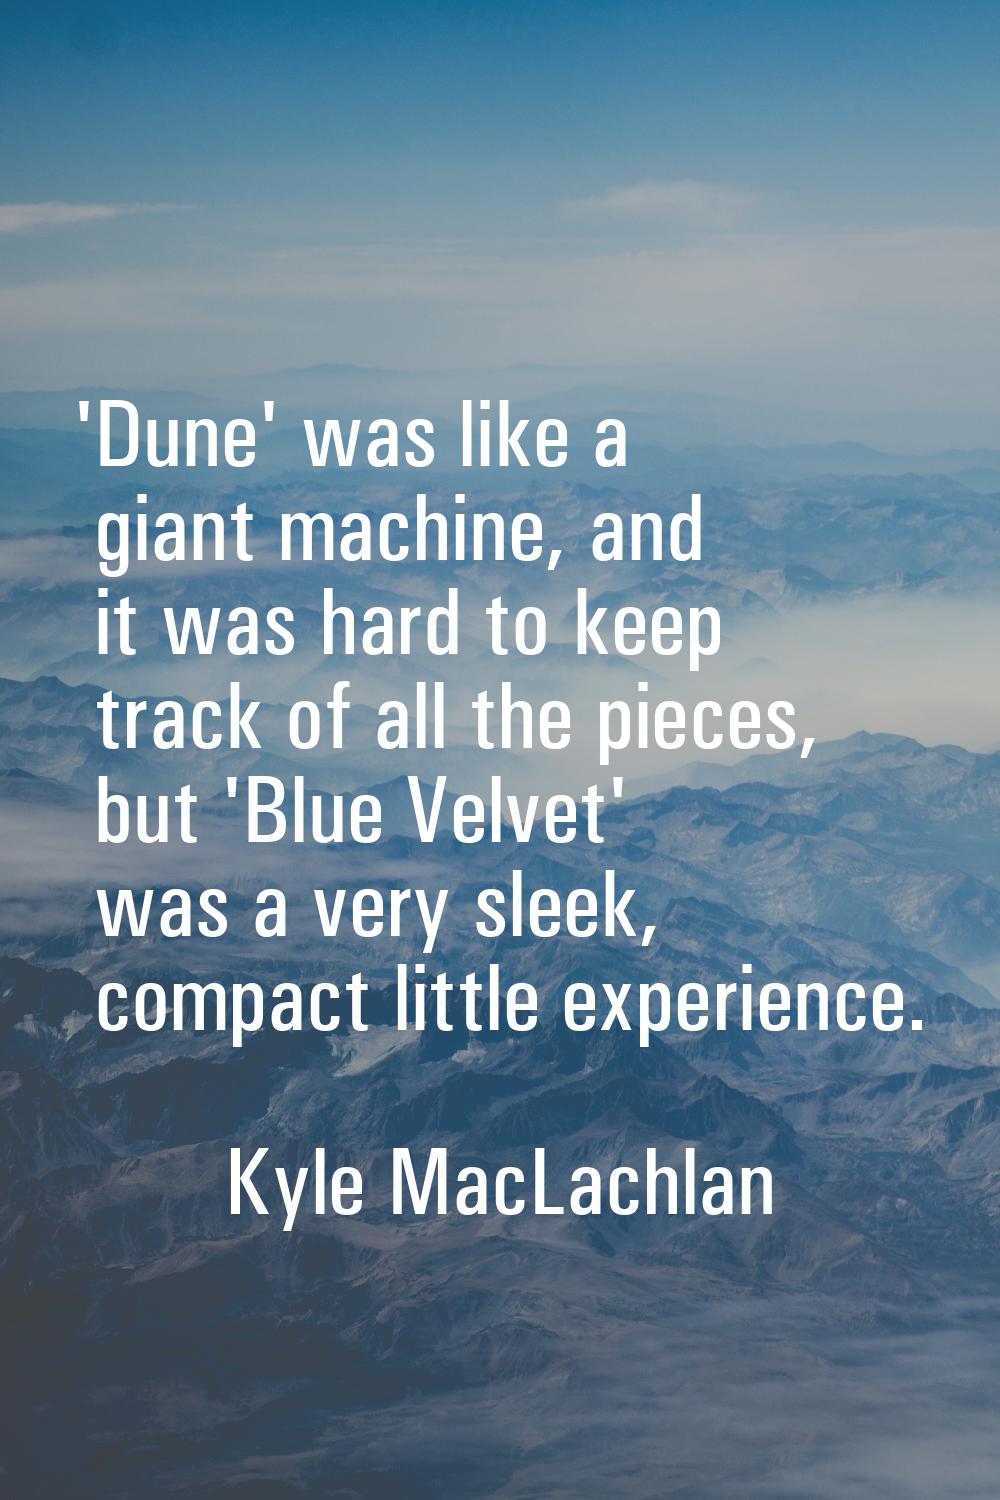 'Dune' was like a giant machine, and it was hard to keep track of all the pieces, but 'Blue Velvet'